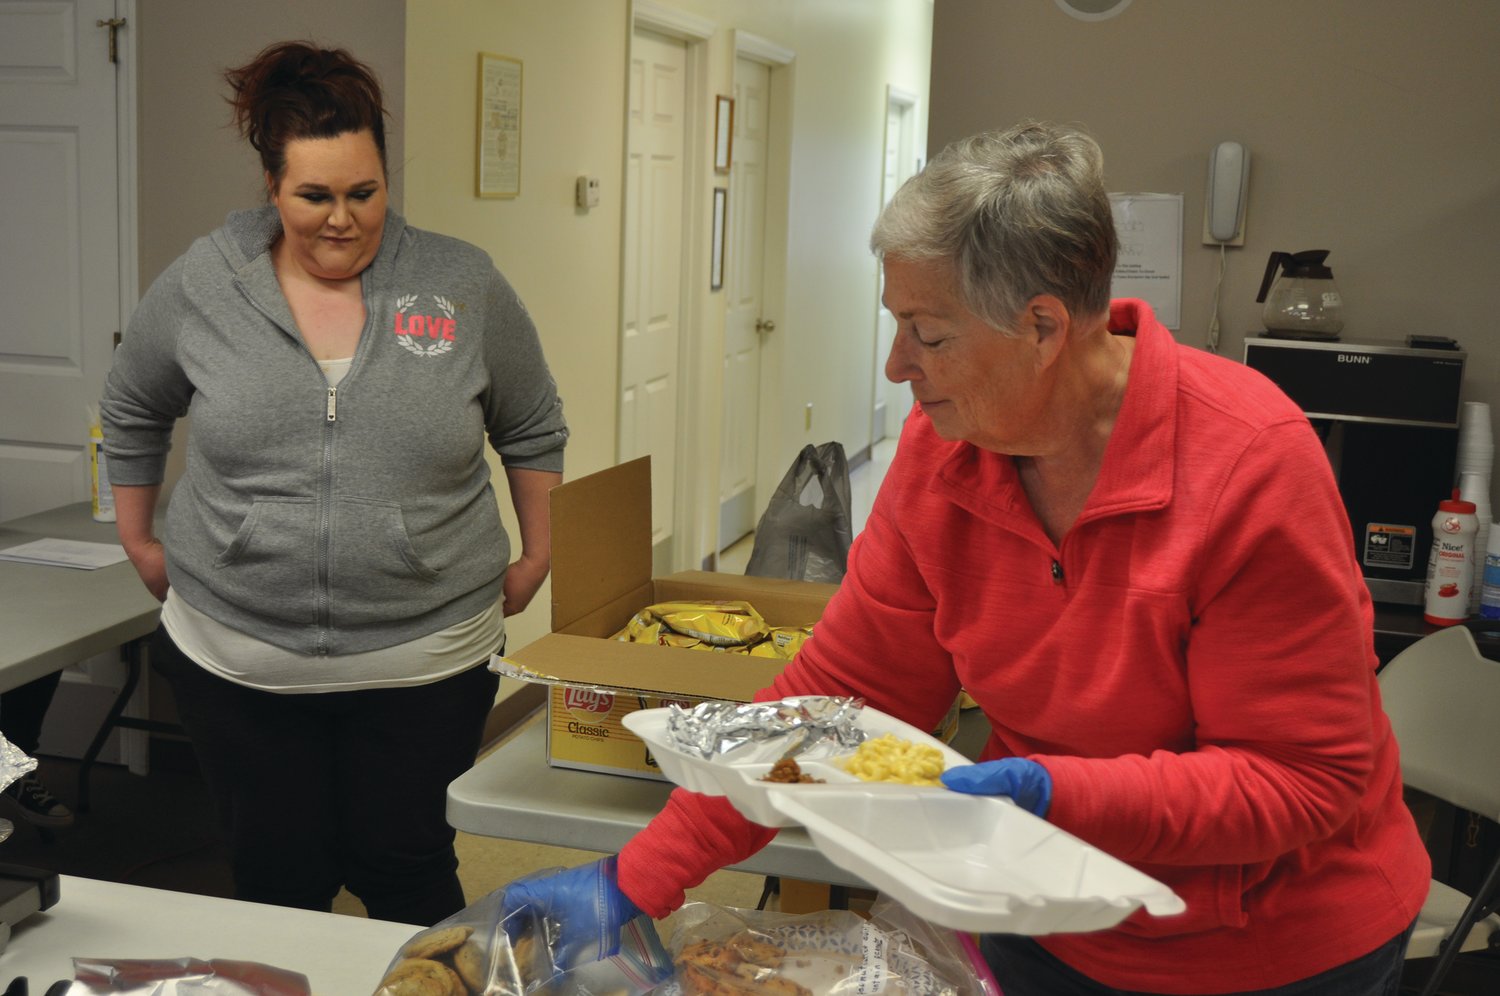 Debbie Biddle makes a container of food for Keirsten Sparks to take home to her children Monday at the Waynetown Fire Department. Free lunches can be picked up from 11:30 a.m. to 1 p.m. at the Waynetown, Wingate and New Richmond fire stations.